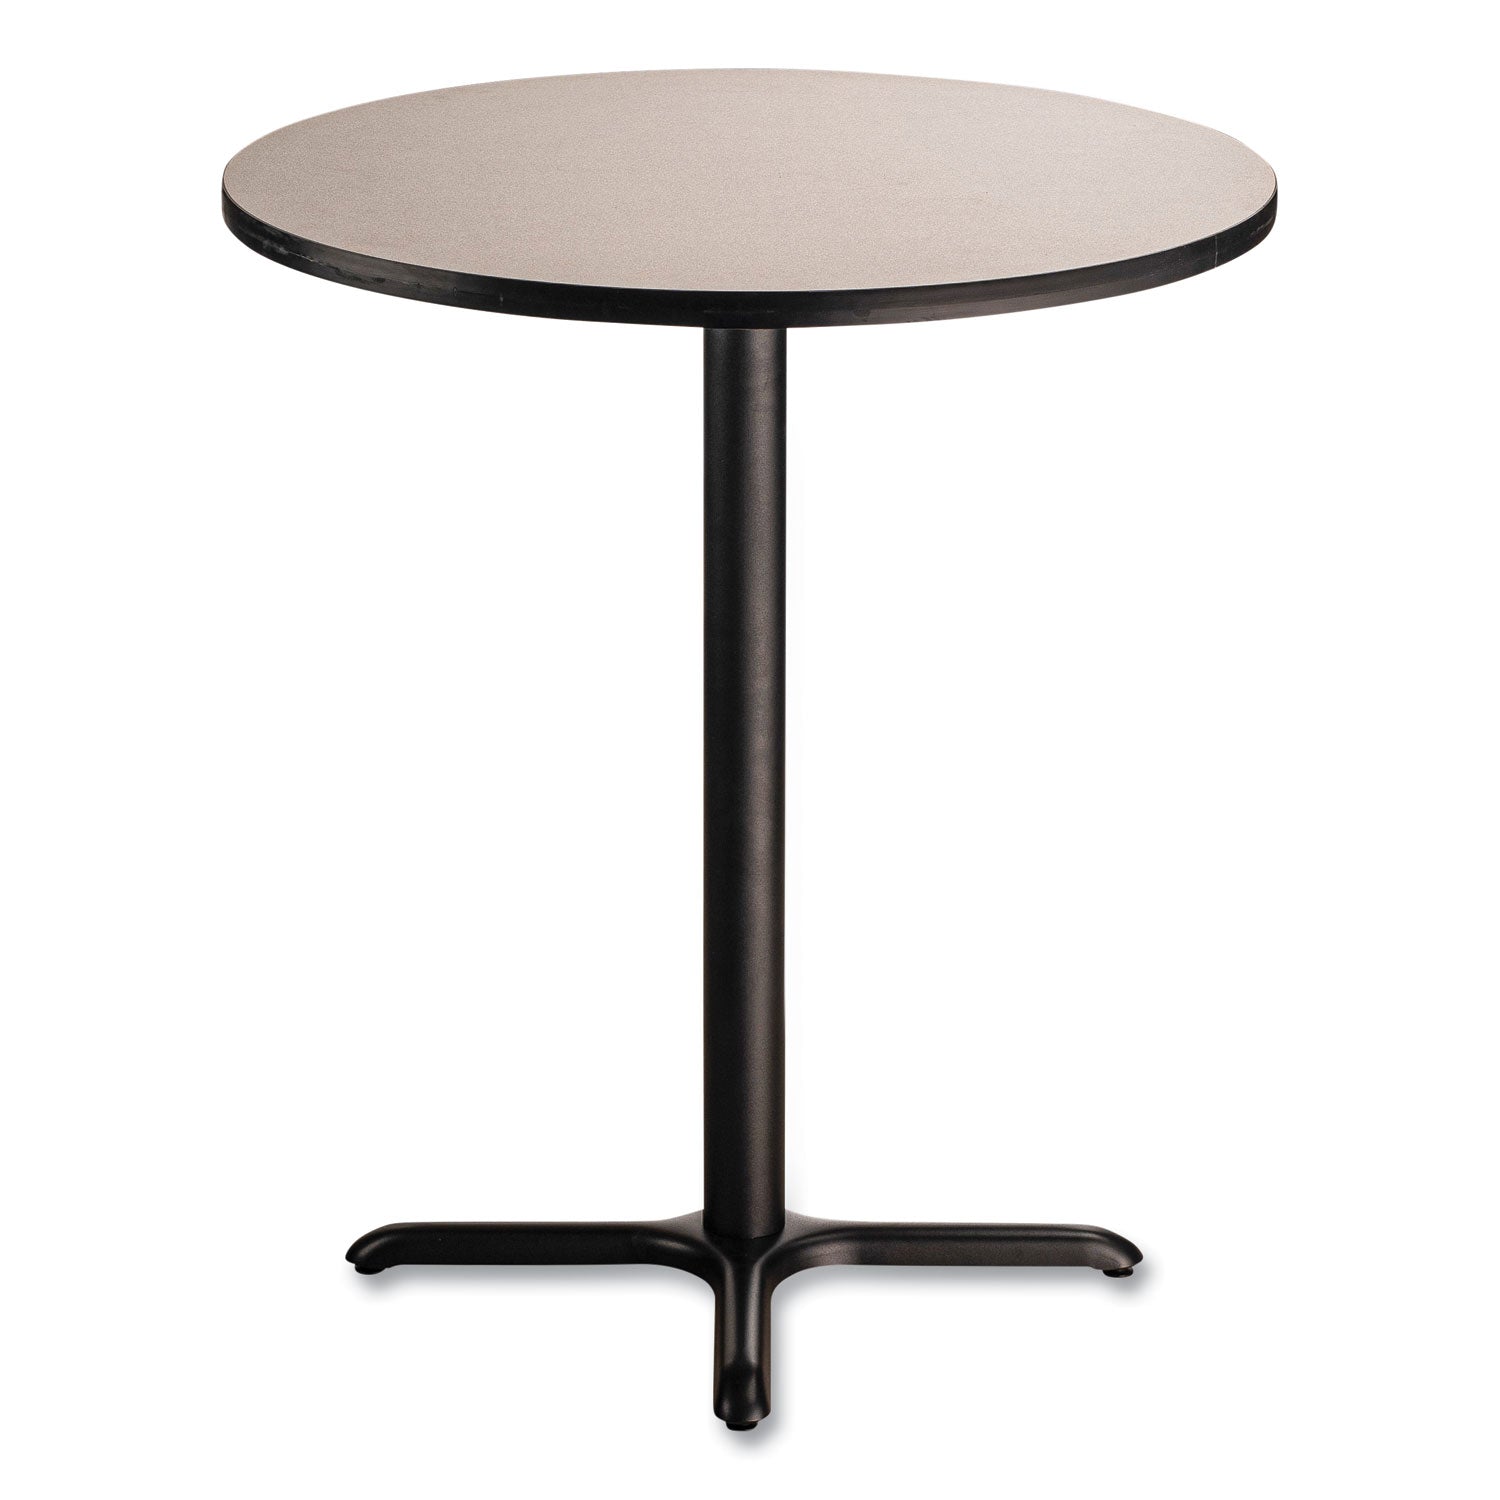 cafe-table-36-diameter-x-42h-round-top-x-base-gray-nebula-top-black-base-ships-in-7-10-business-days_npsct13636xb1gy - 2